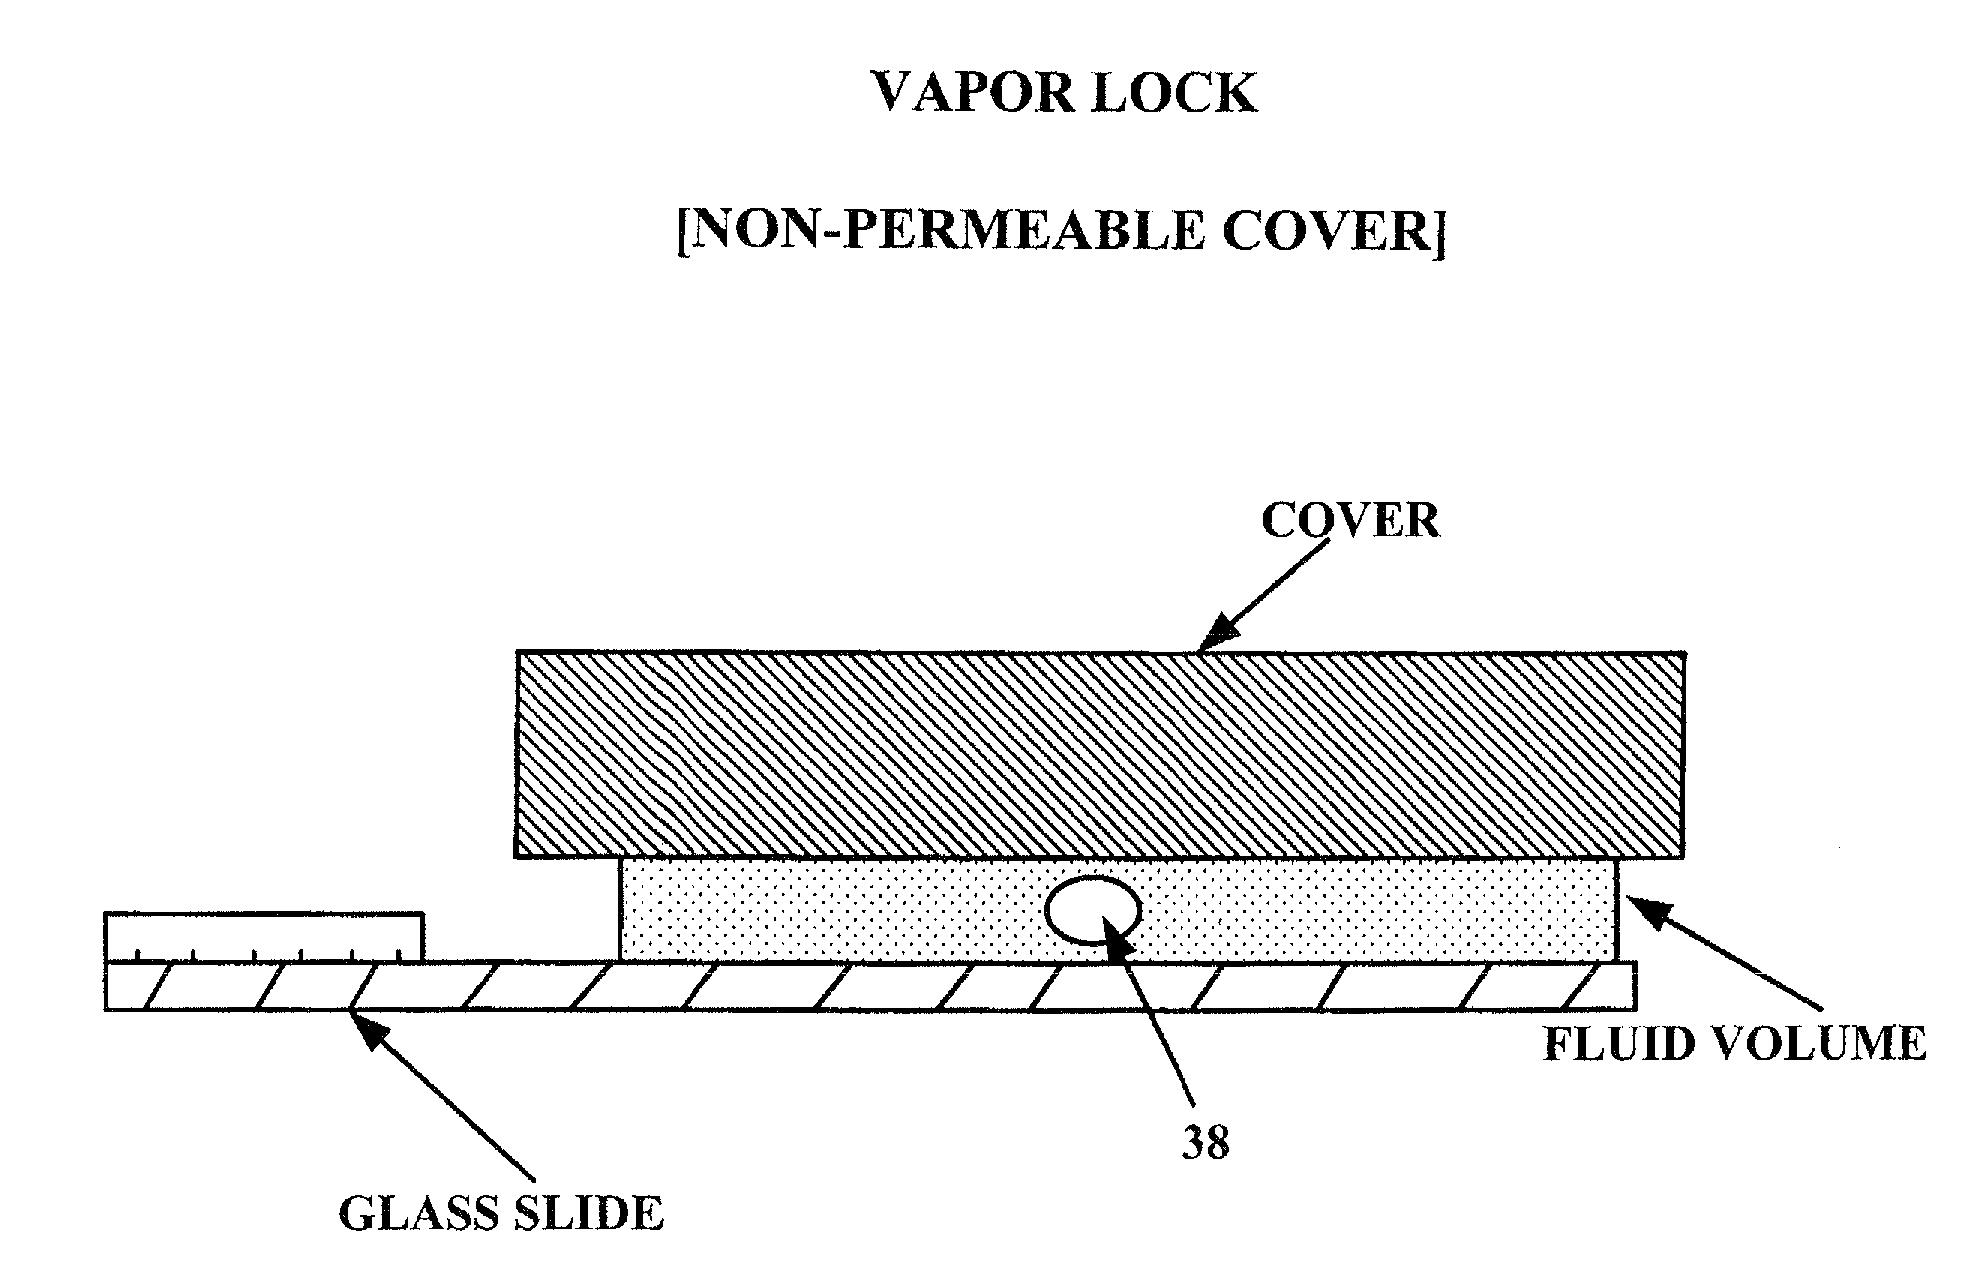 Method and apparatus for treating a biological sample with a liquid reagent